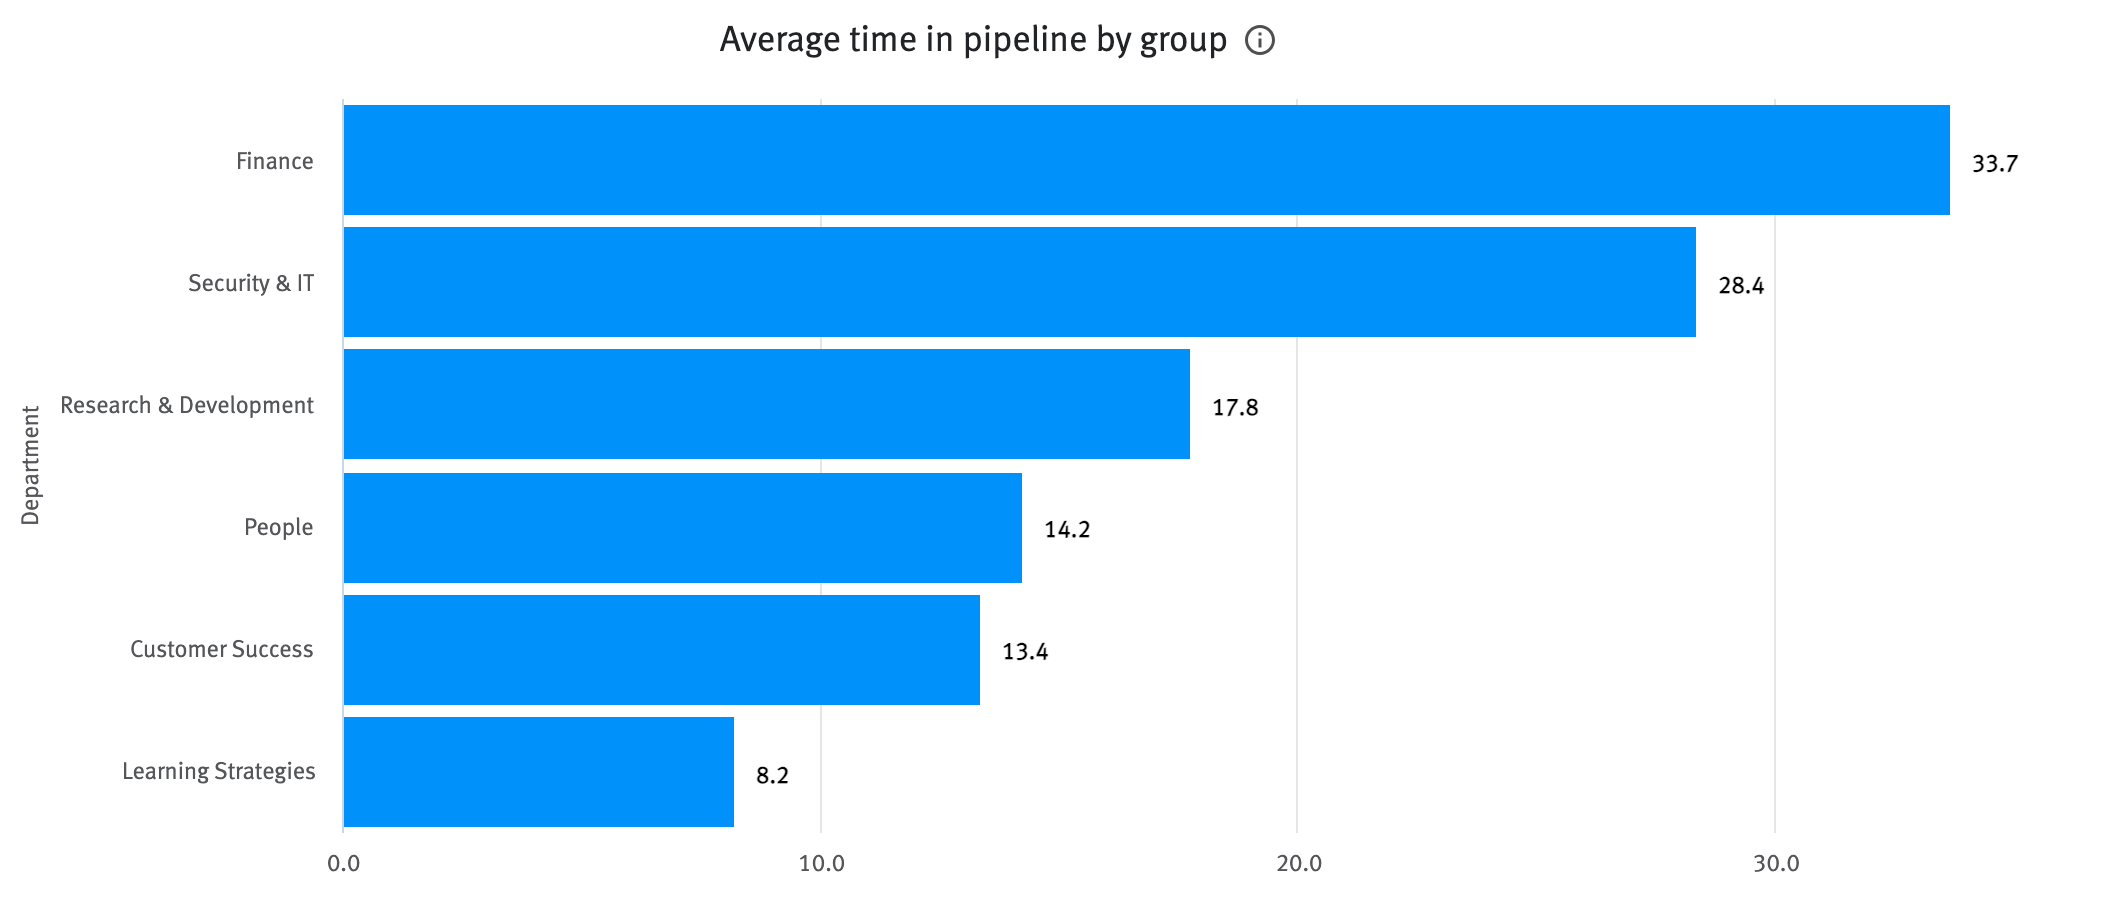 Average time in pipeline by group chart